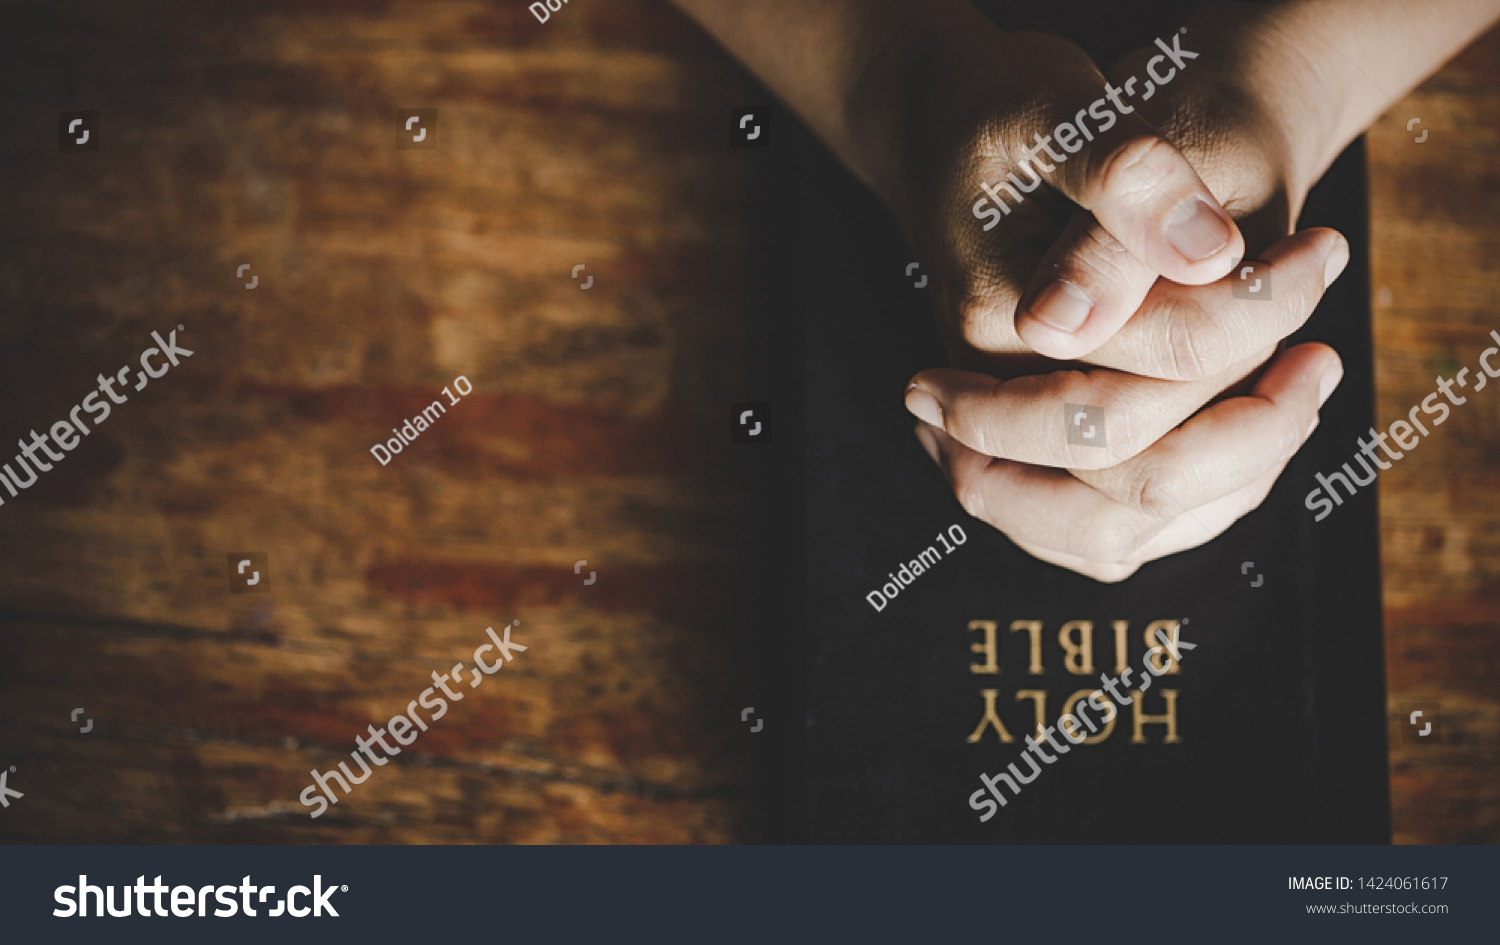 Christian life crisis prayer to god. Woman Pray for god blessing to wishing have a better life. woman hands praying to god with the bible. begging for forgiveness and believe in goodness.  #1424061617